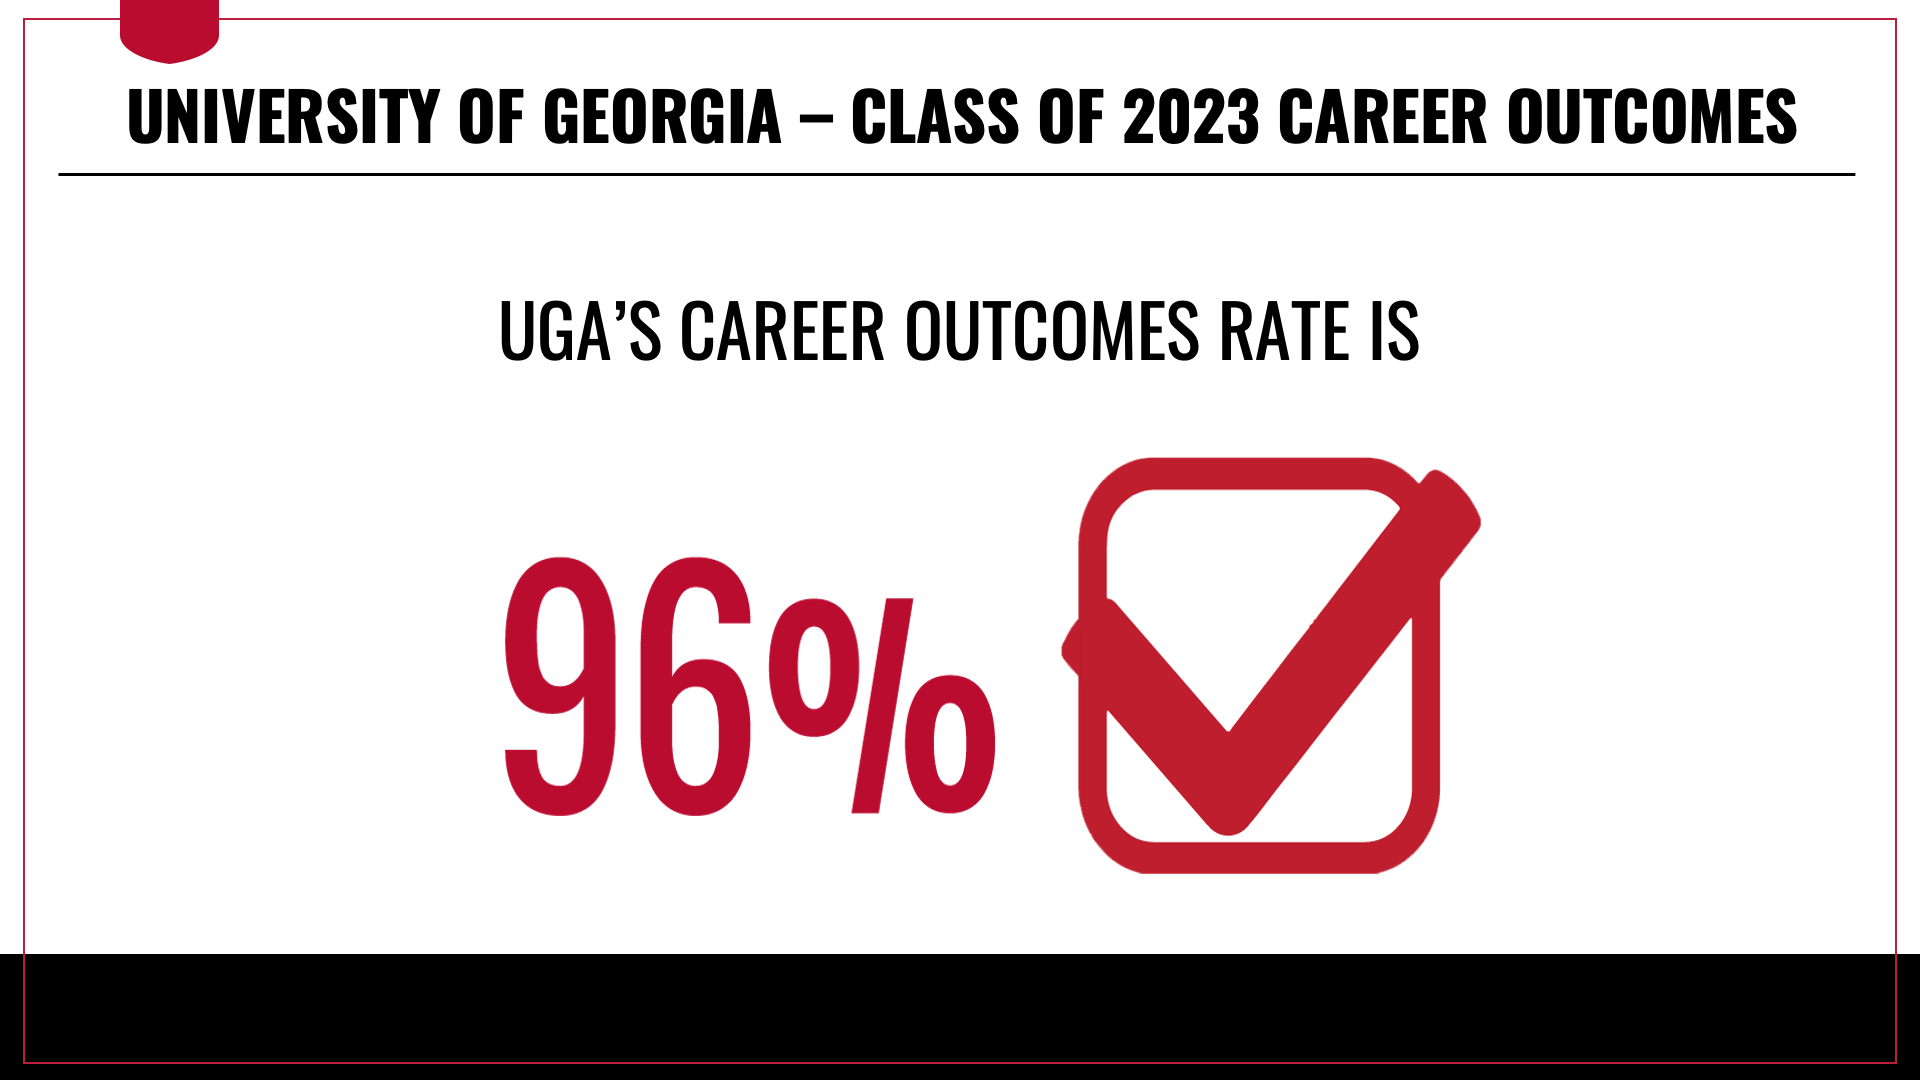 UGA's Class of 2023 Career Outcomes rate is 96 percent